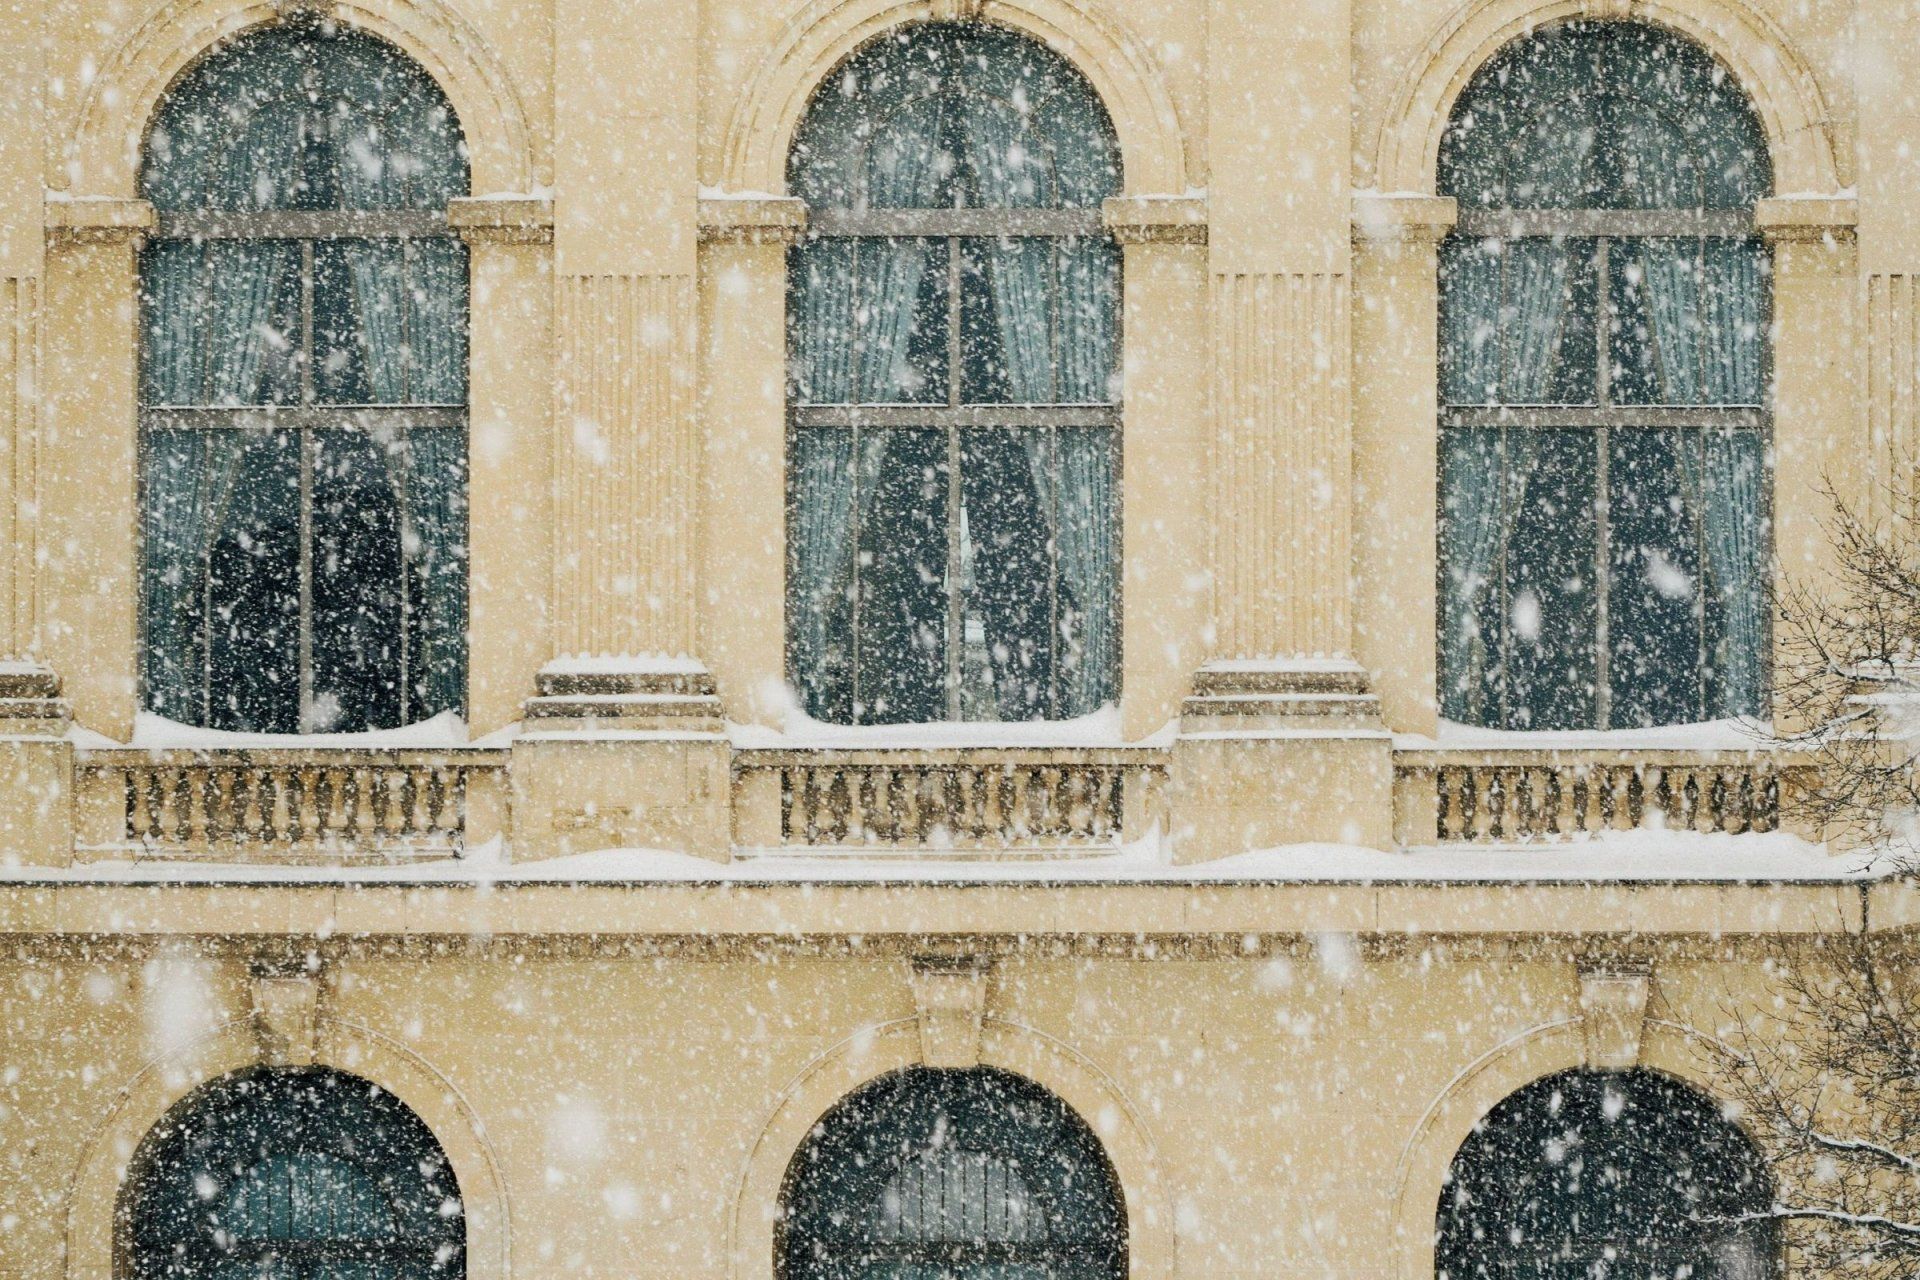 snow is falling on a building with arched windows